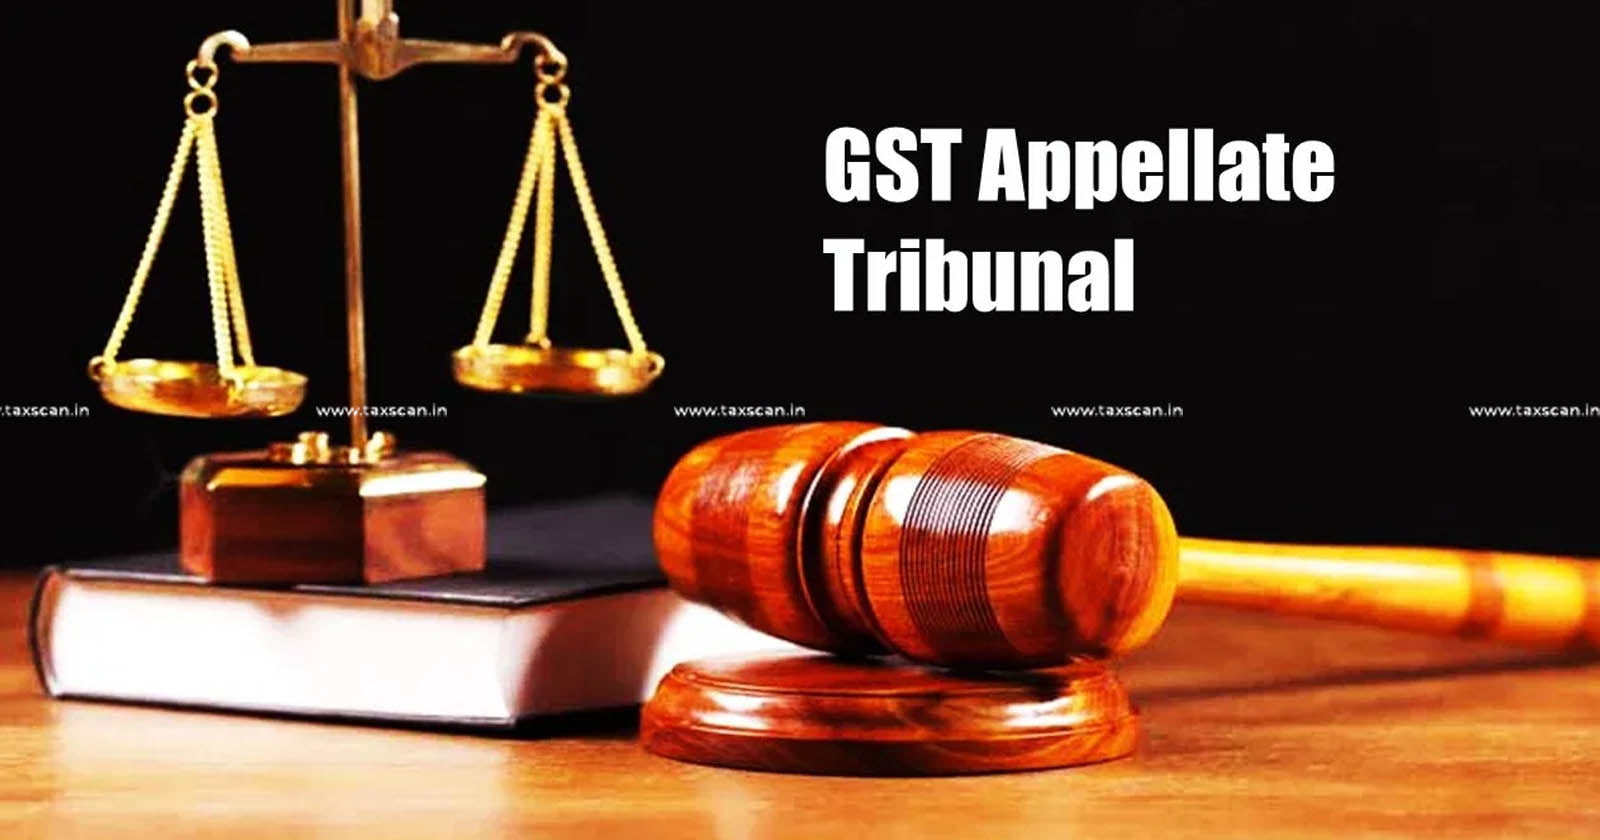 Non -Constitution of GST Appellate Tribunal - Patna Highcourt - GST Appellate Tribunal - GST - Recovery of Balance Tax amount - Balance Tax amount- taxscan